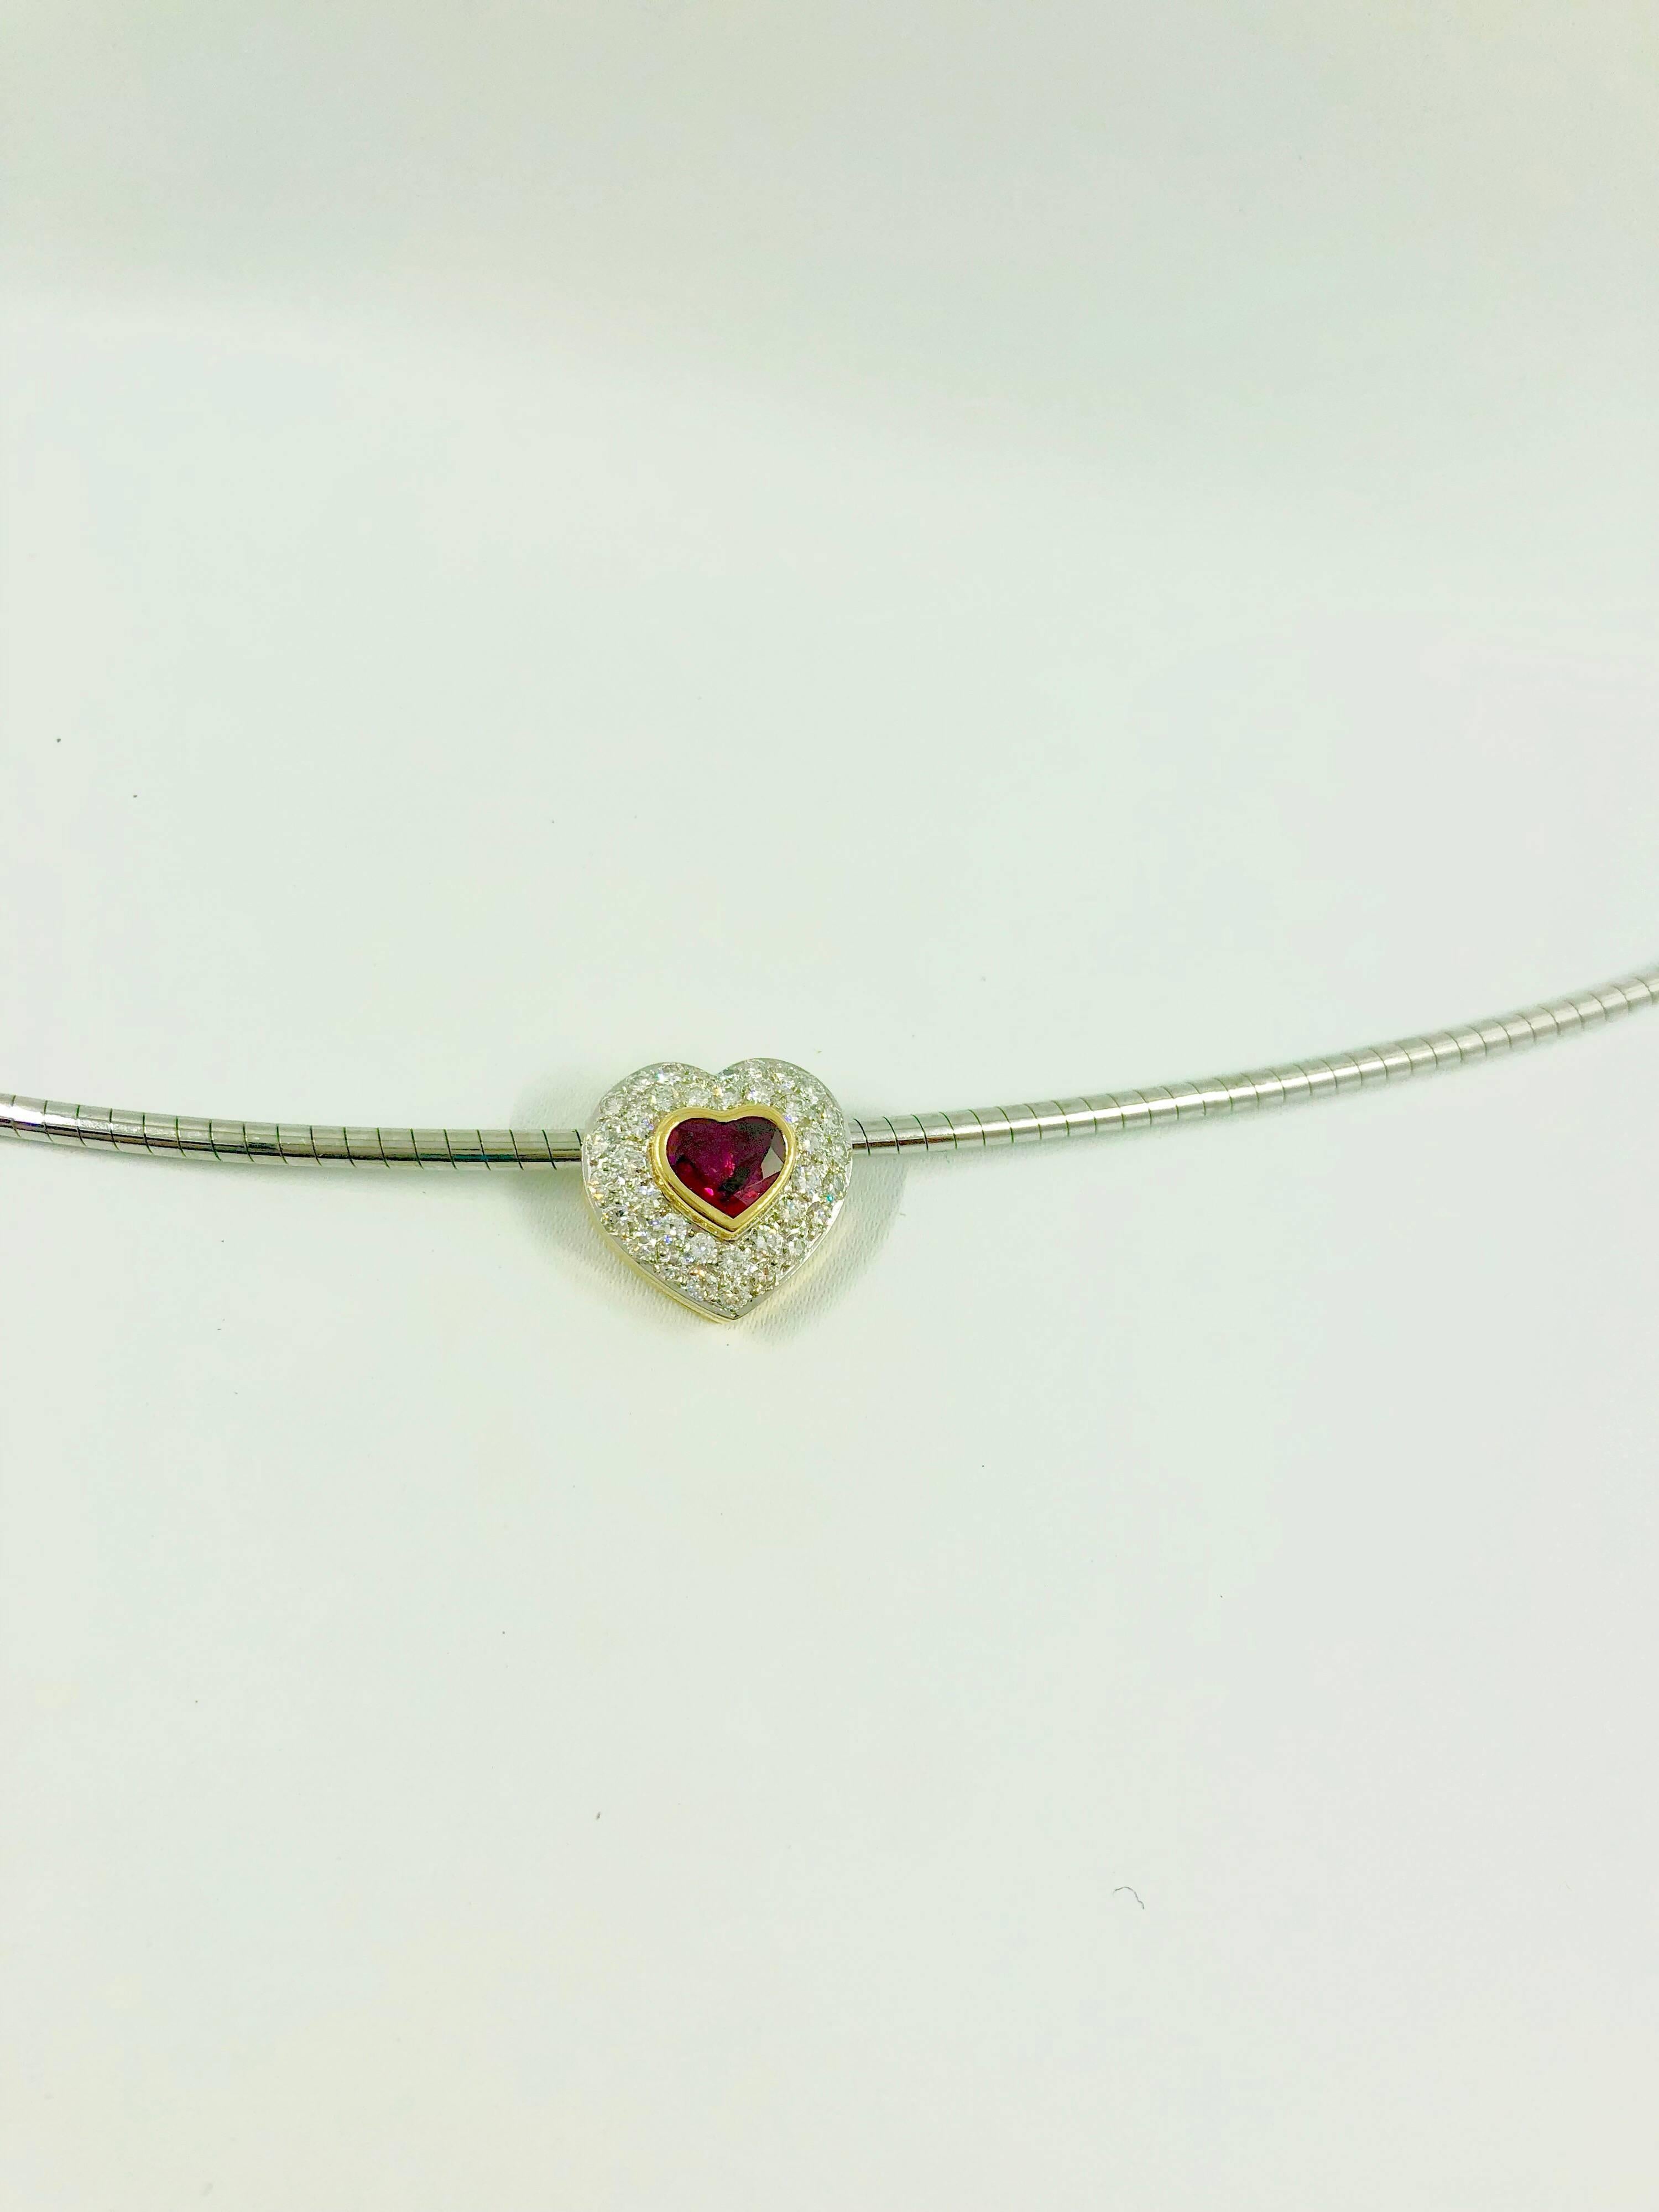 A G.MINNER white and yellow gold clip pendant set with a beautiful heart-shaped Burmese ruby surrounded by 35 brilliant cut diamonds. The pendant is a unique creation entirely handmade.
The color of this stone is described in the trade under the